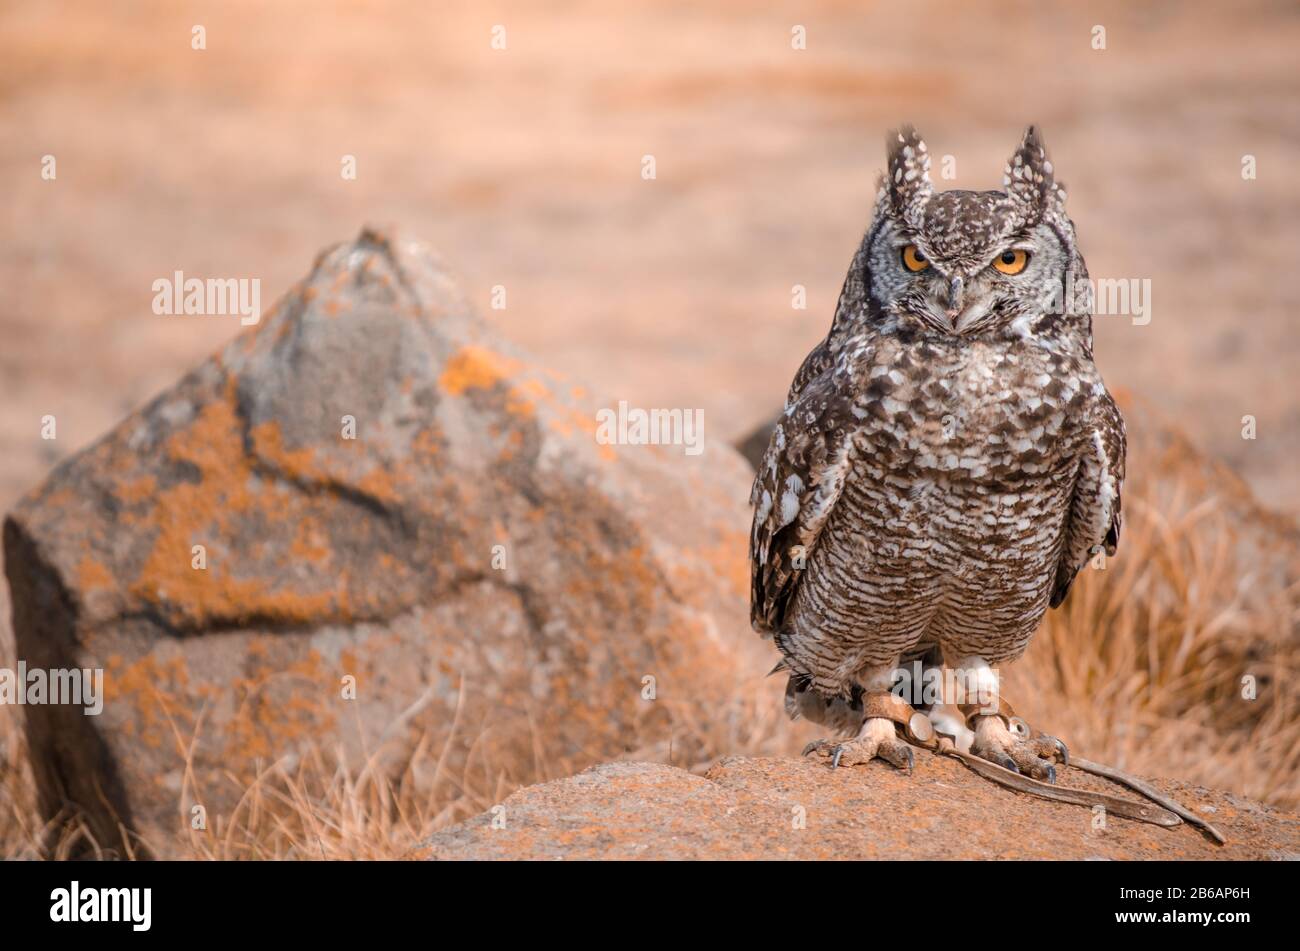 A rescued African spotted owl (africanus bubo) perched on a rock at a birds of prey show, South Africa Stock Photo